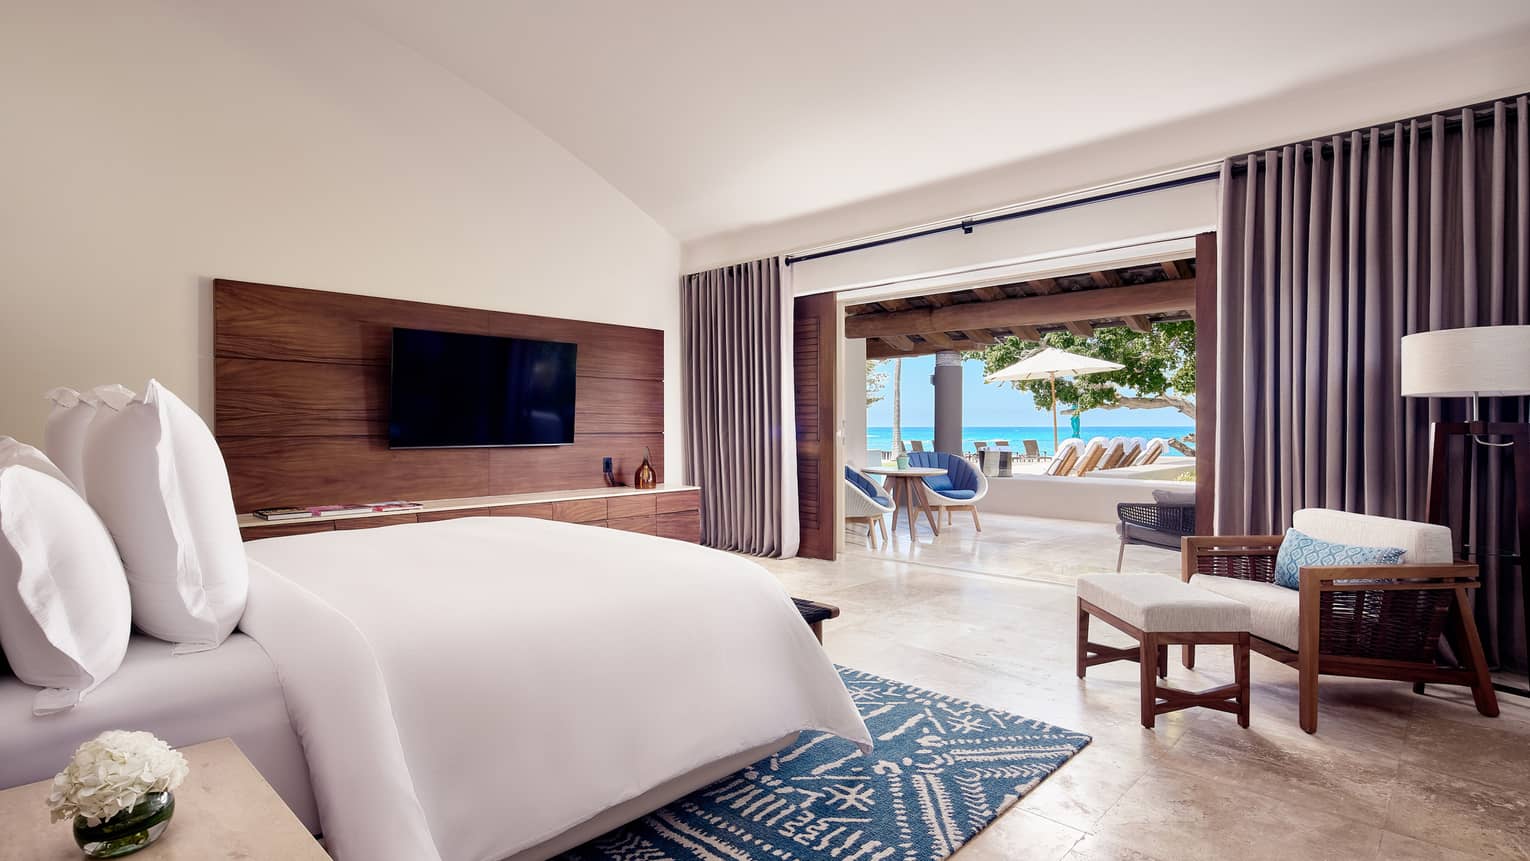 Arena Beach House bedroom with bed and white linens, white armchair, wall-mounted TV, doors open to living room